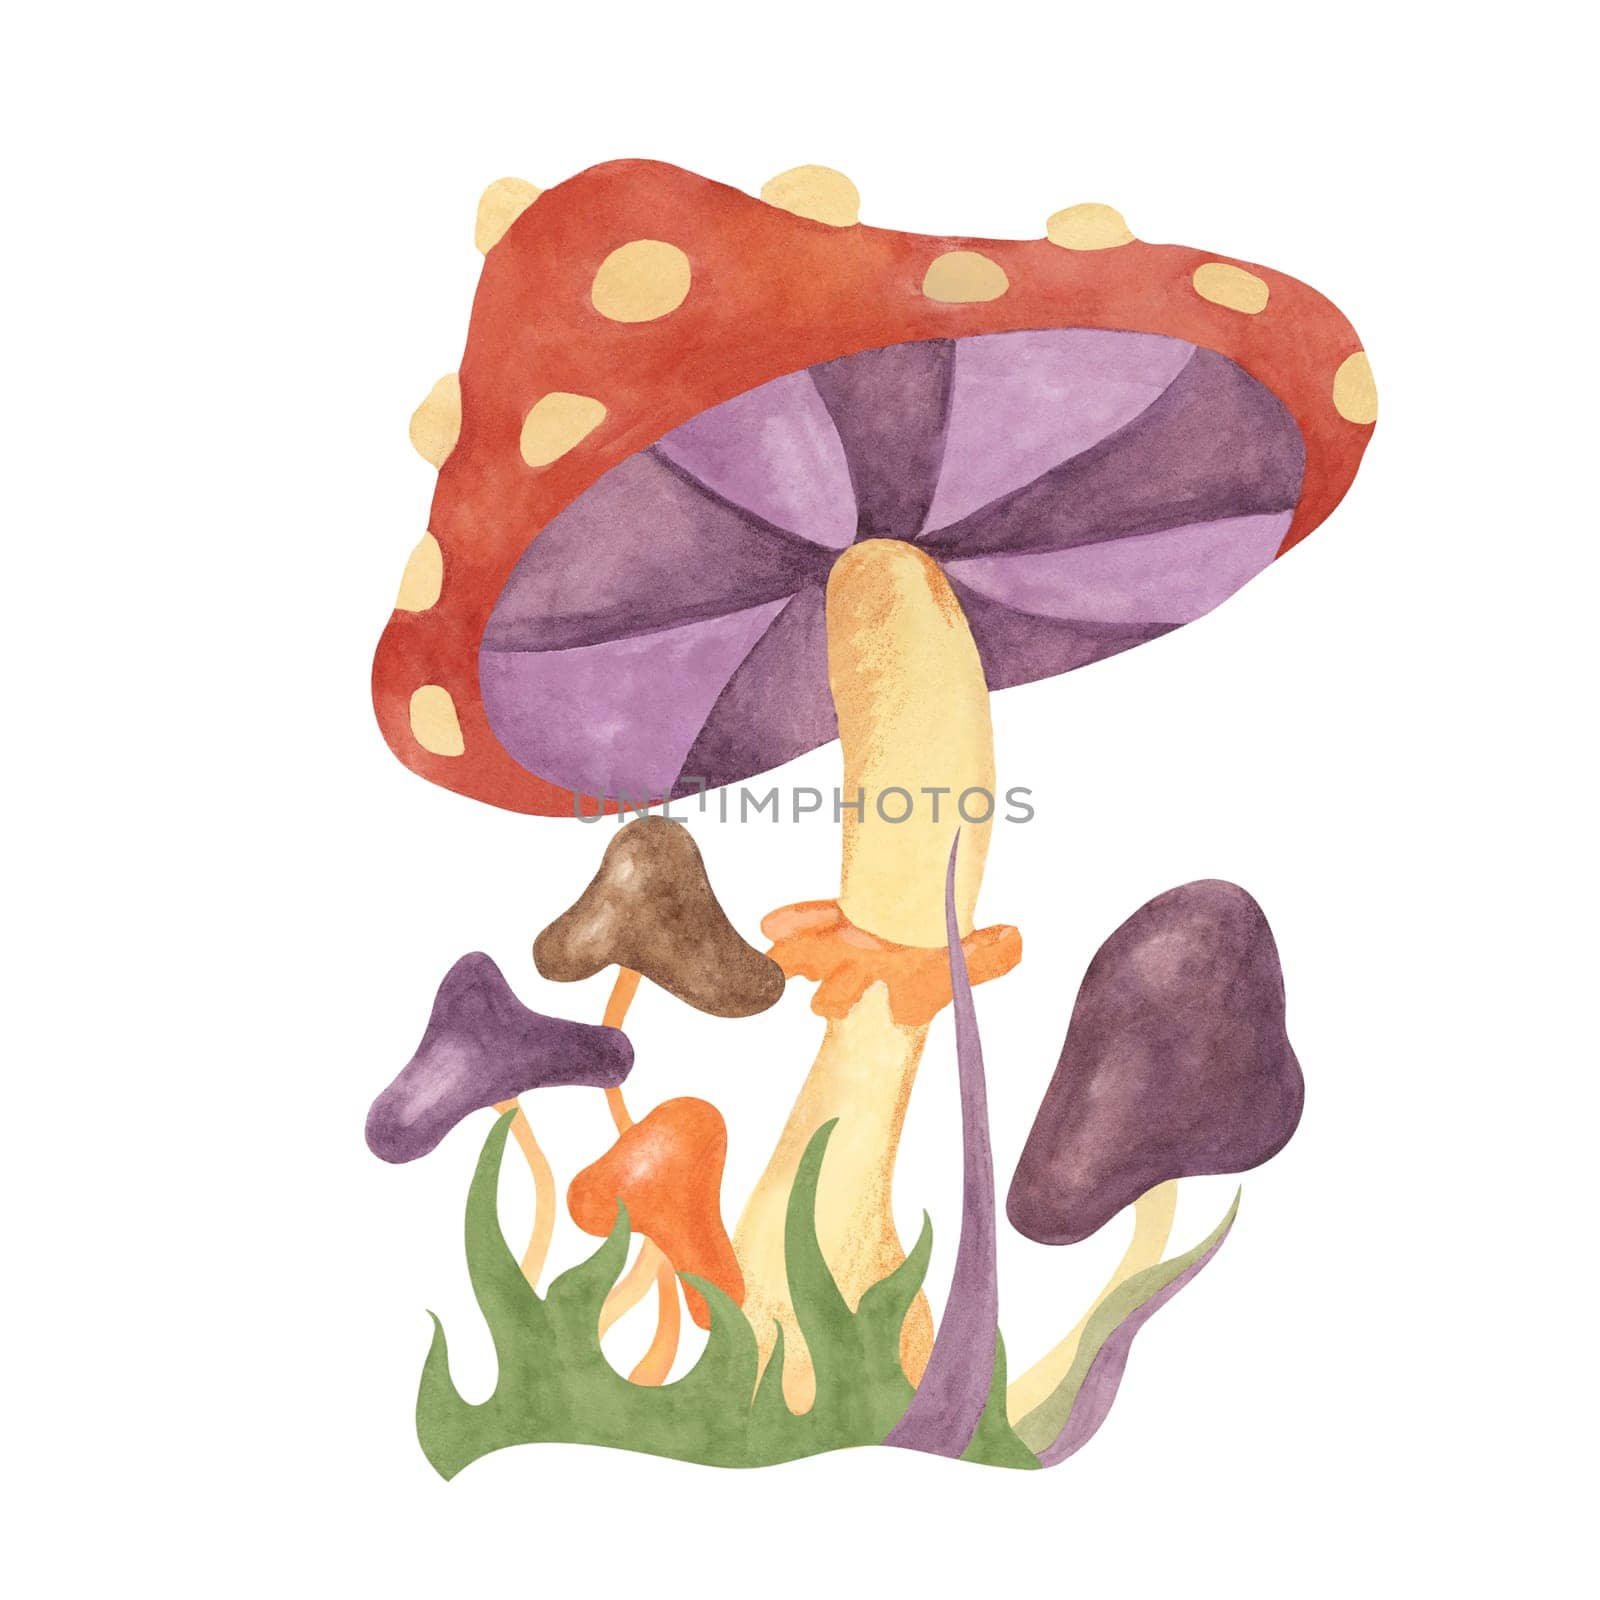 Retro hippie mushrooms and fly agaric in 1970s style. Hippie psychedelic groovy fungus cliparts. Watercolor groovy illustration for t-shirt printing by Fofito